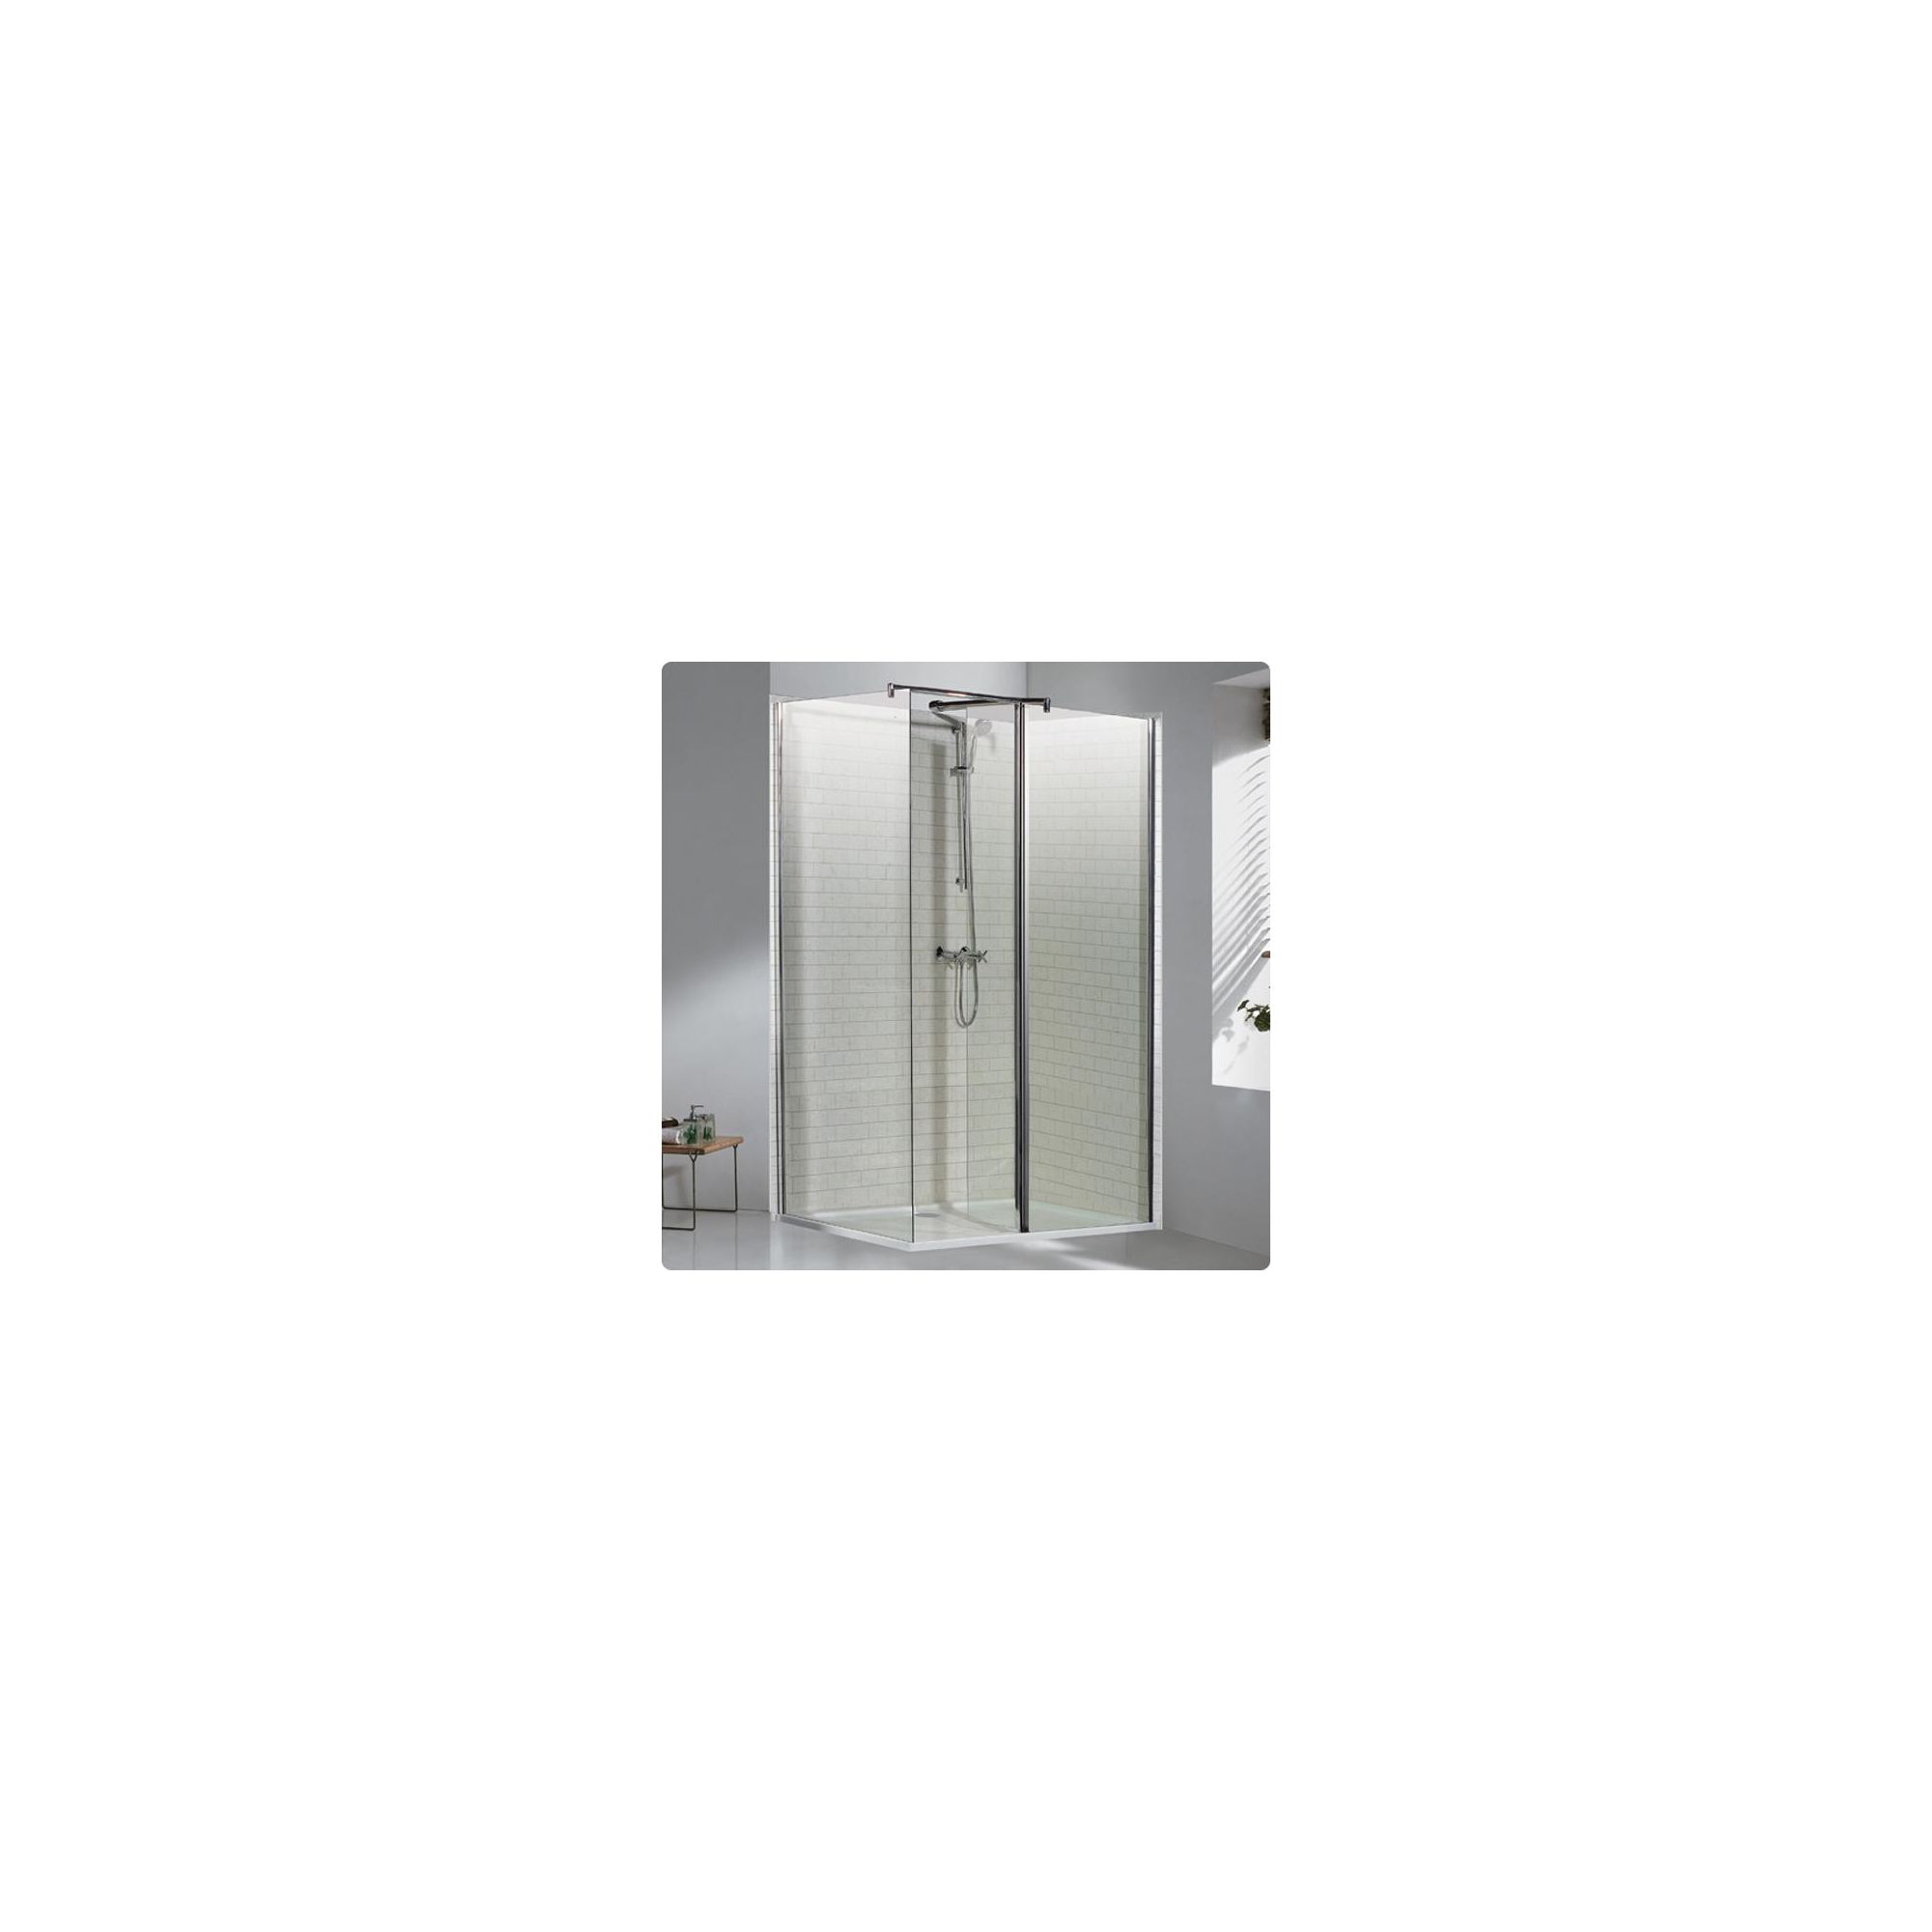 Duchy Choice Silver Walk-In Shower Enclosure 1200mm x 900mm (Complete with Tray), 6mm Glass at Tesco Direct